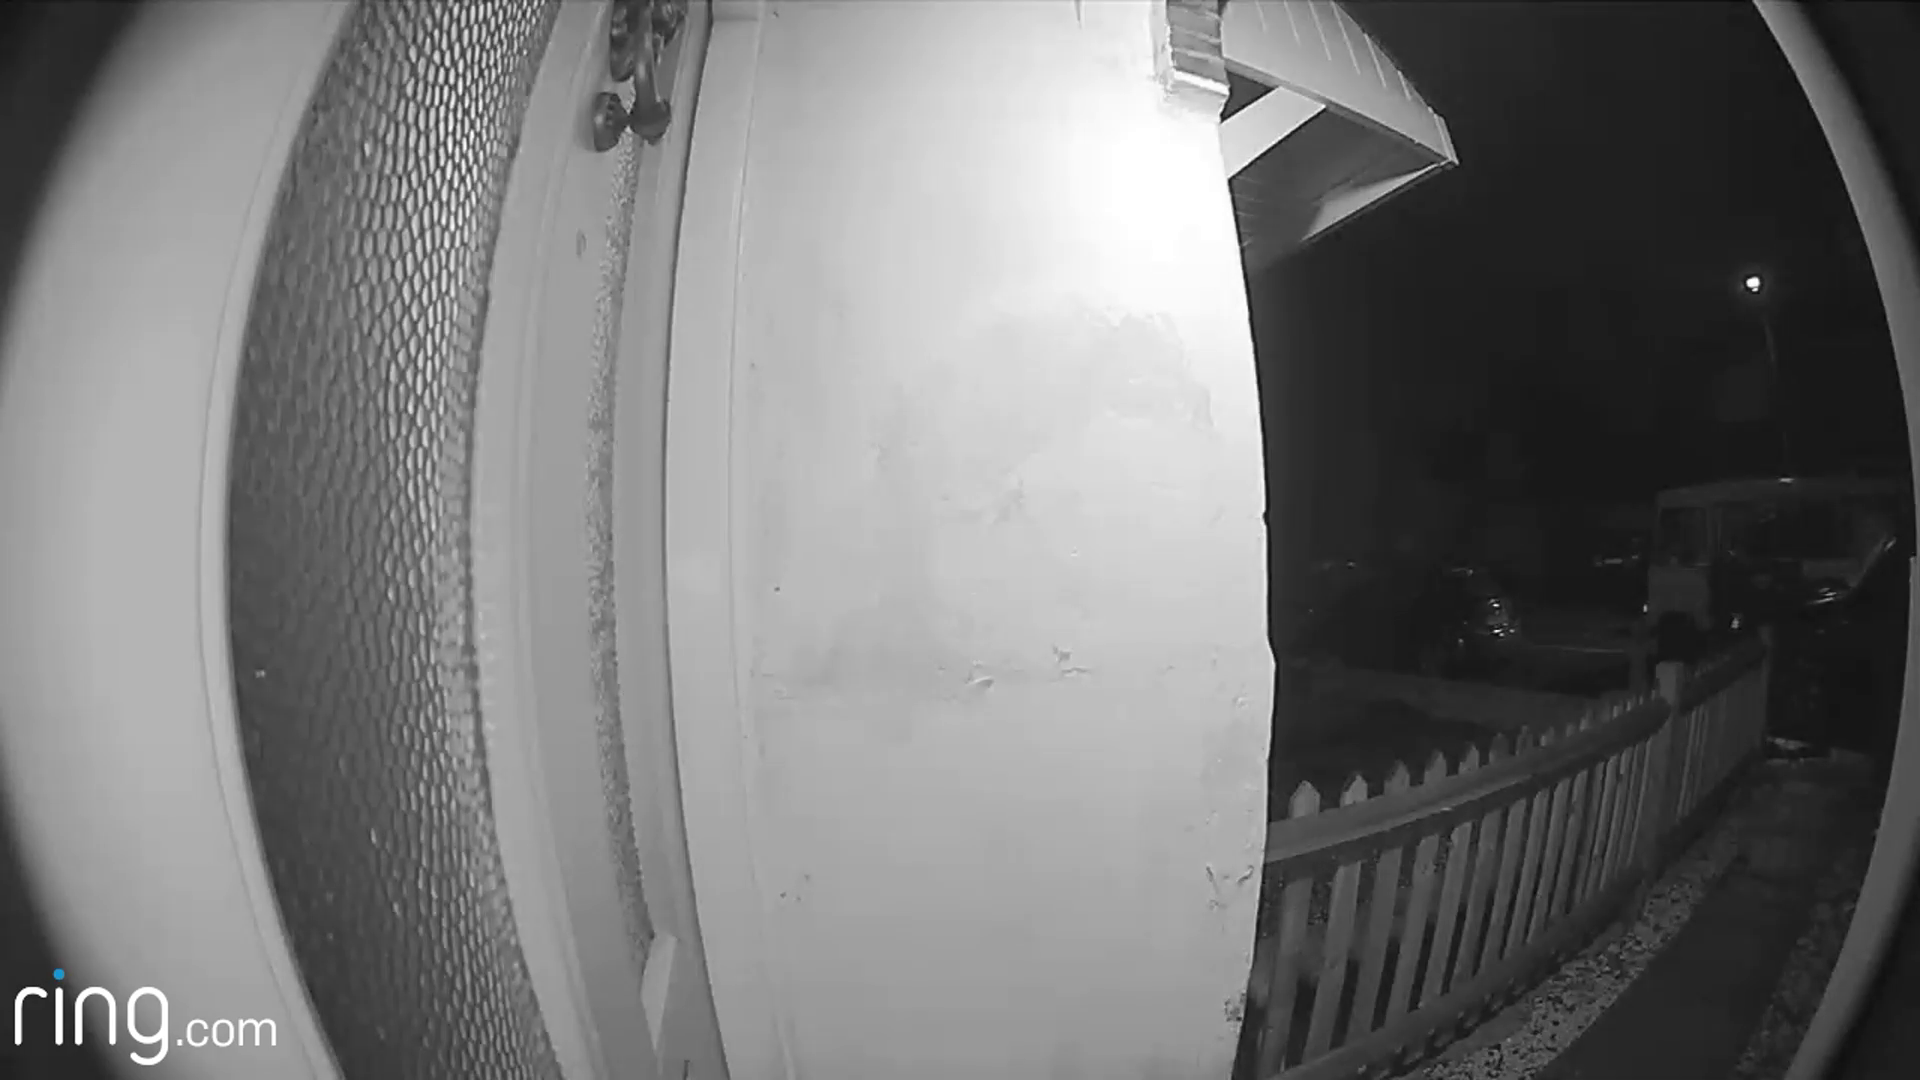 Night vision view from Ring Video Doorbell 2 showing a house entrance.